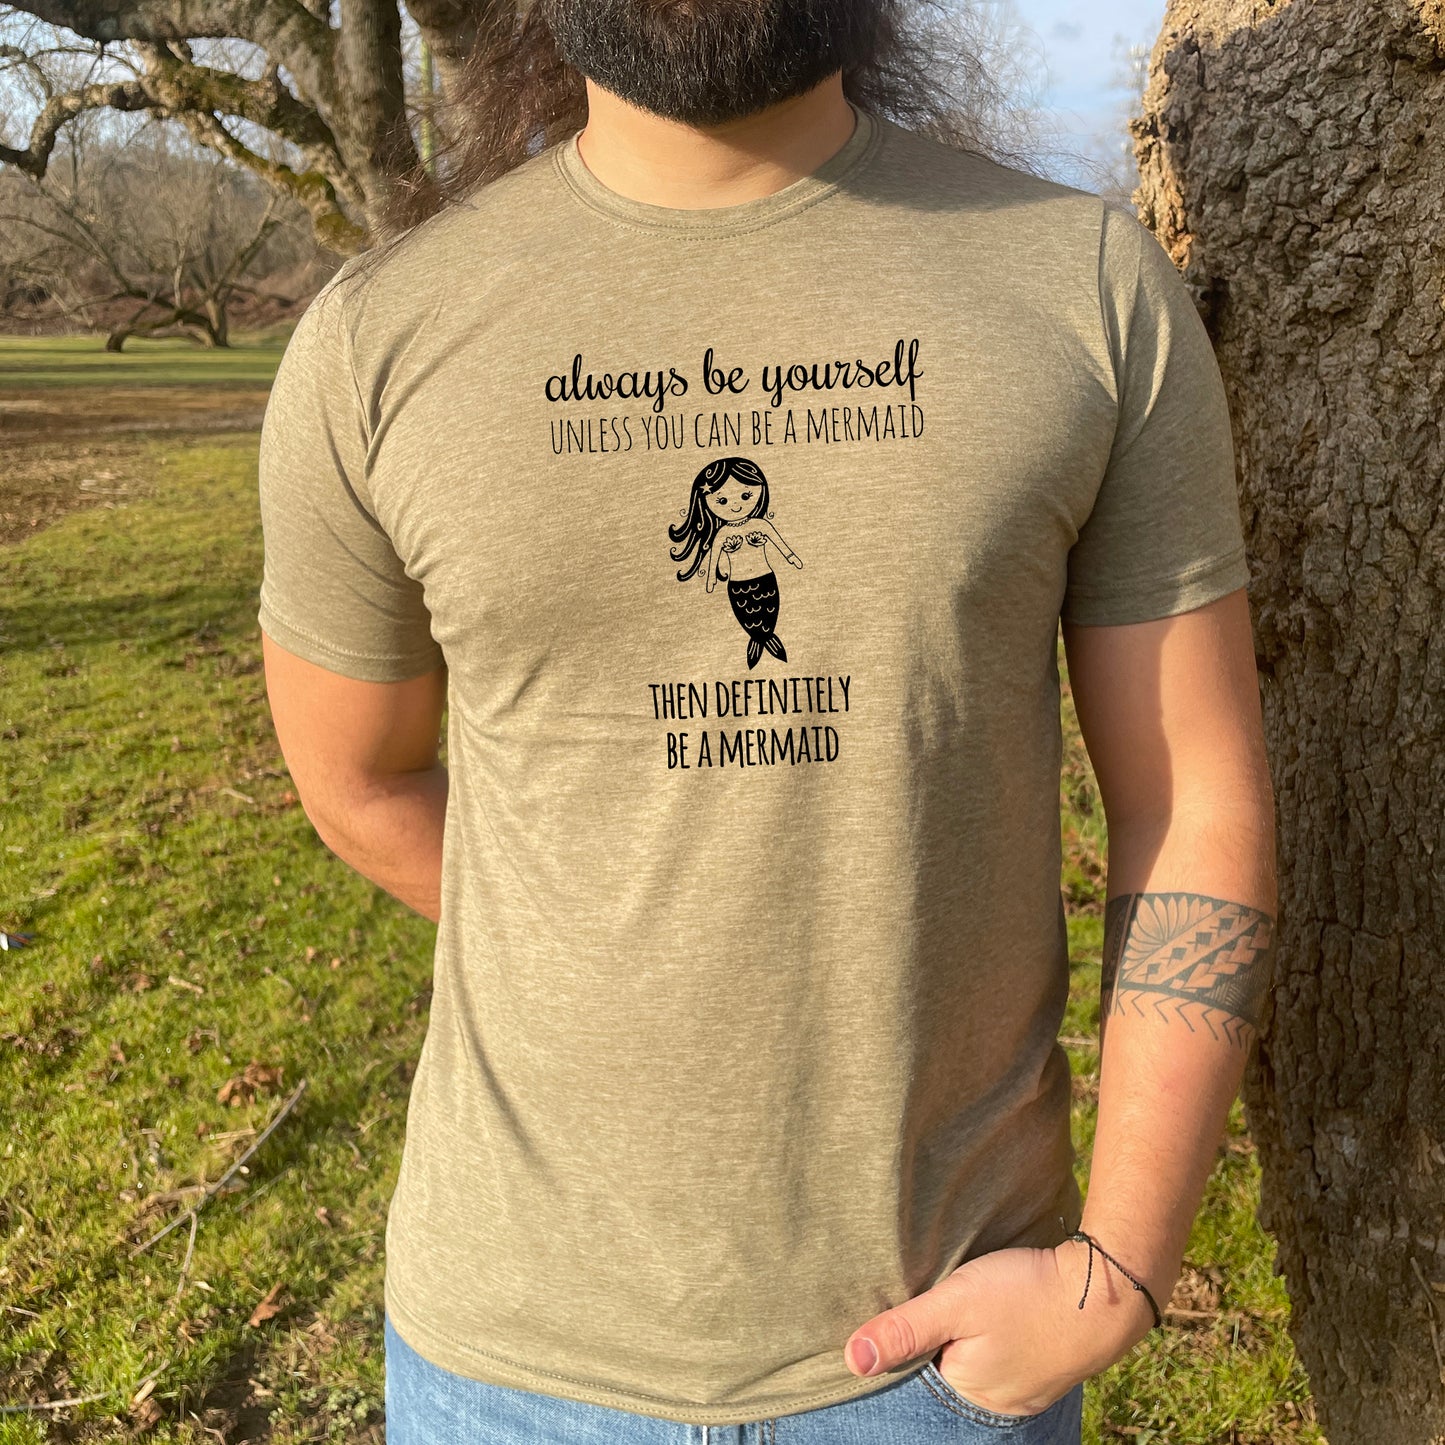 Always Be Yourself Unless You Can Be A Mermaid, Then Definitely Be A Mermaid - Men's / Unisex Tee - Stonewash Blue or Sage